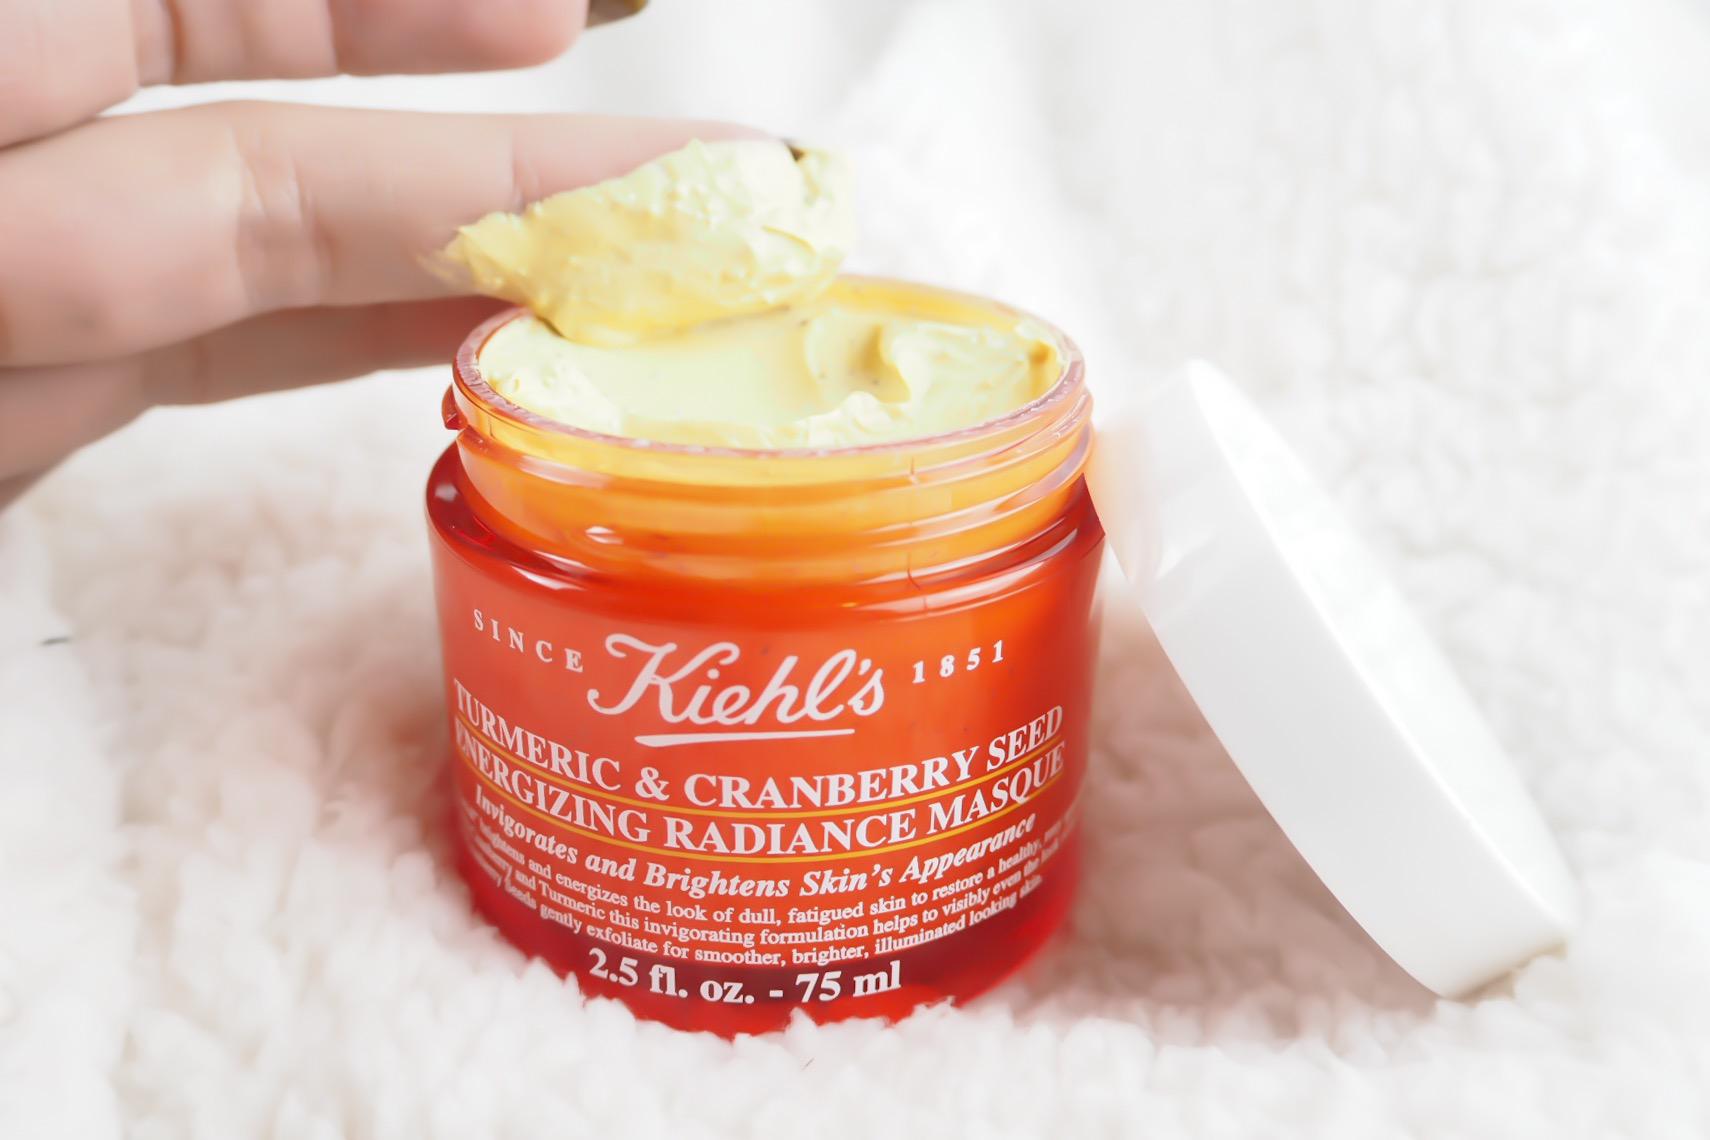 mat na Kiehl's Turmeric & Cranberry Seed Energizing Radiance Masque